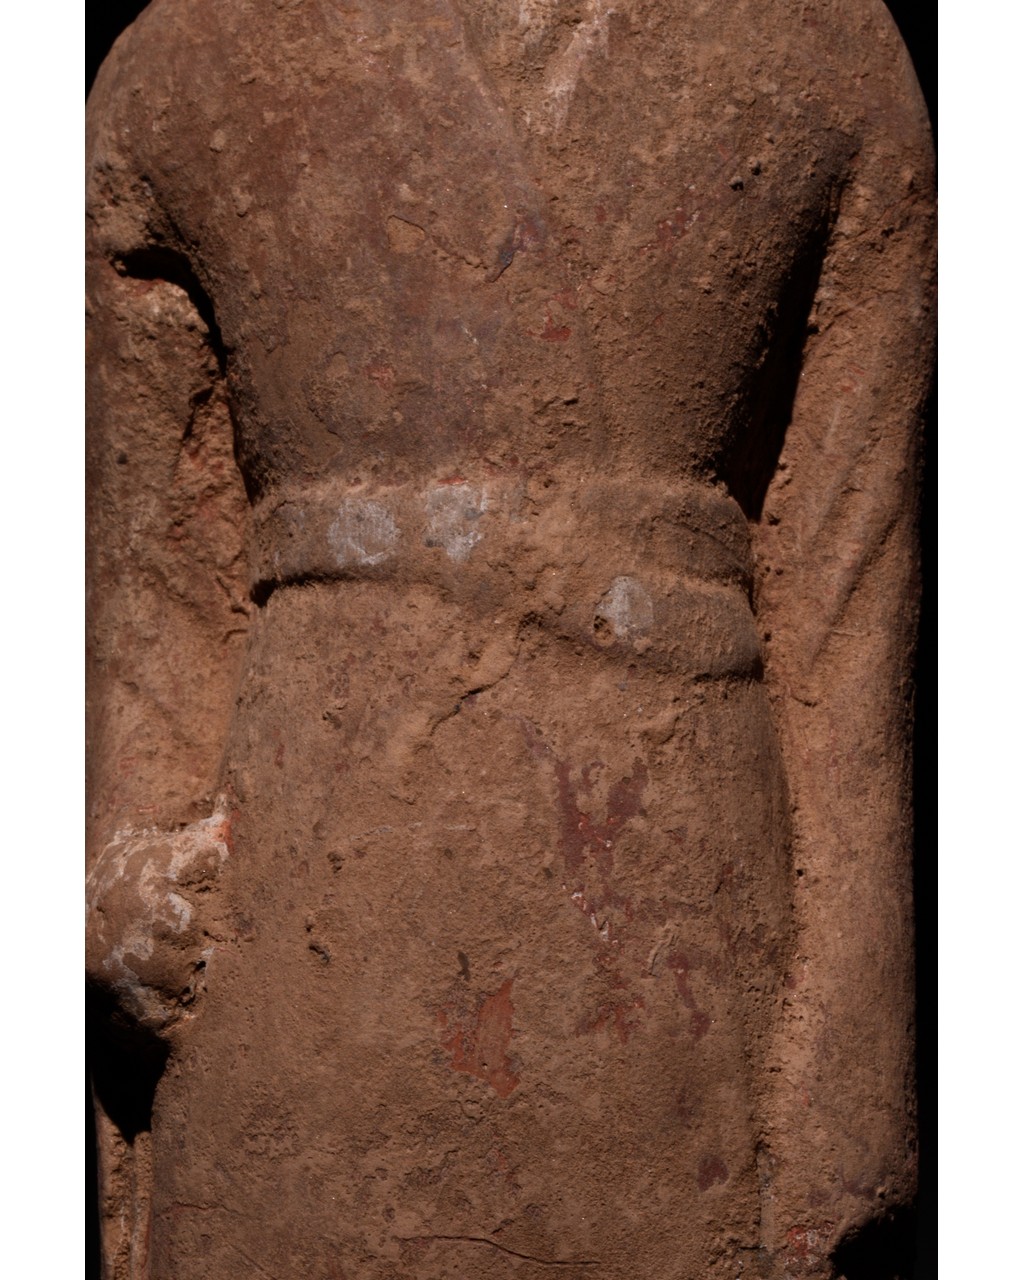 NORTHERN WEI TERRACOTTA PAINTED FIGURE - Image 6 of 6